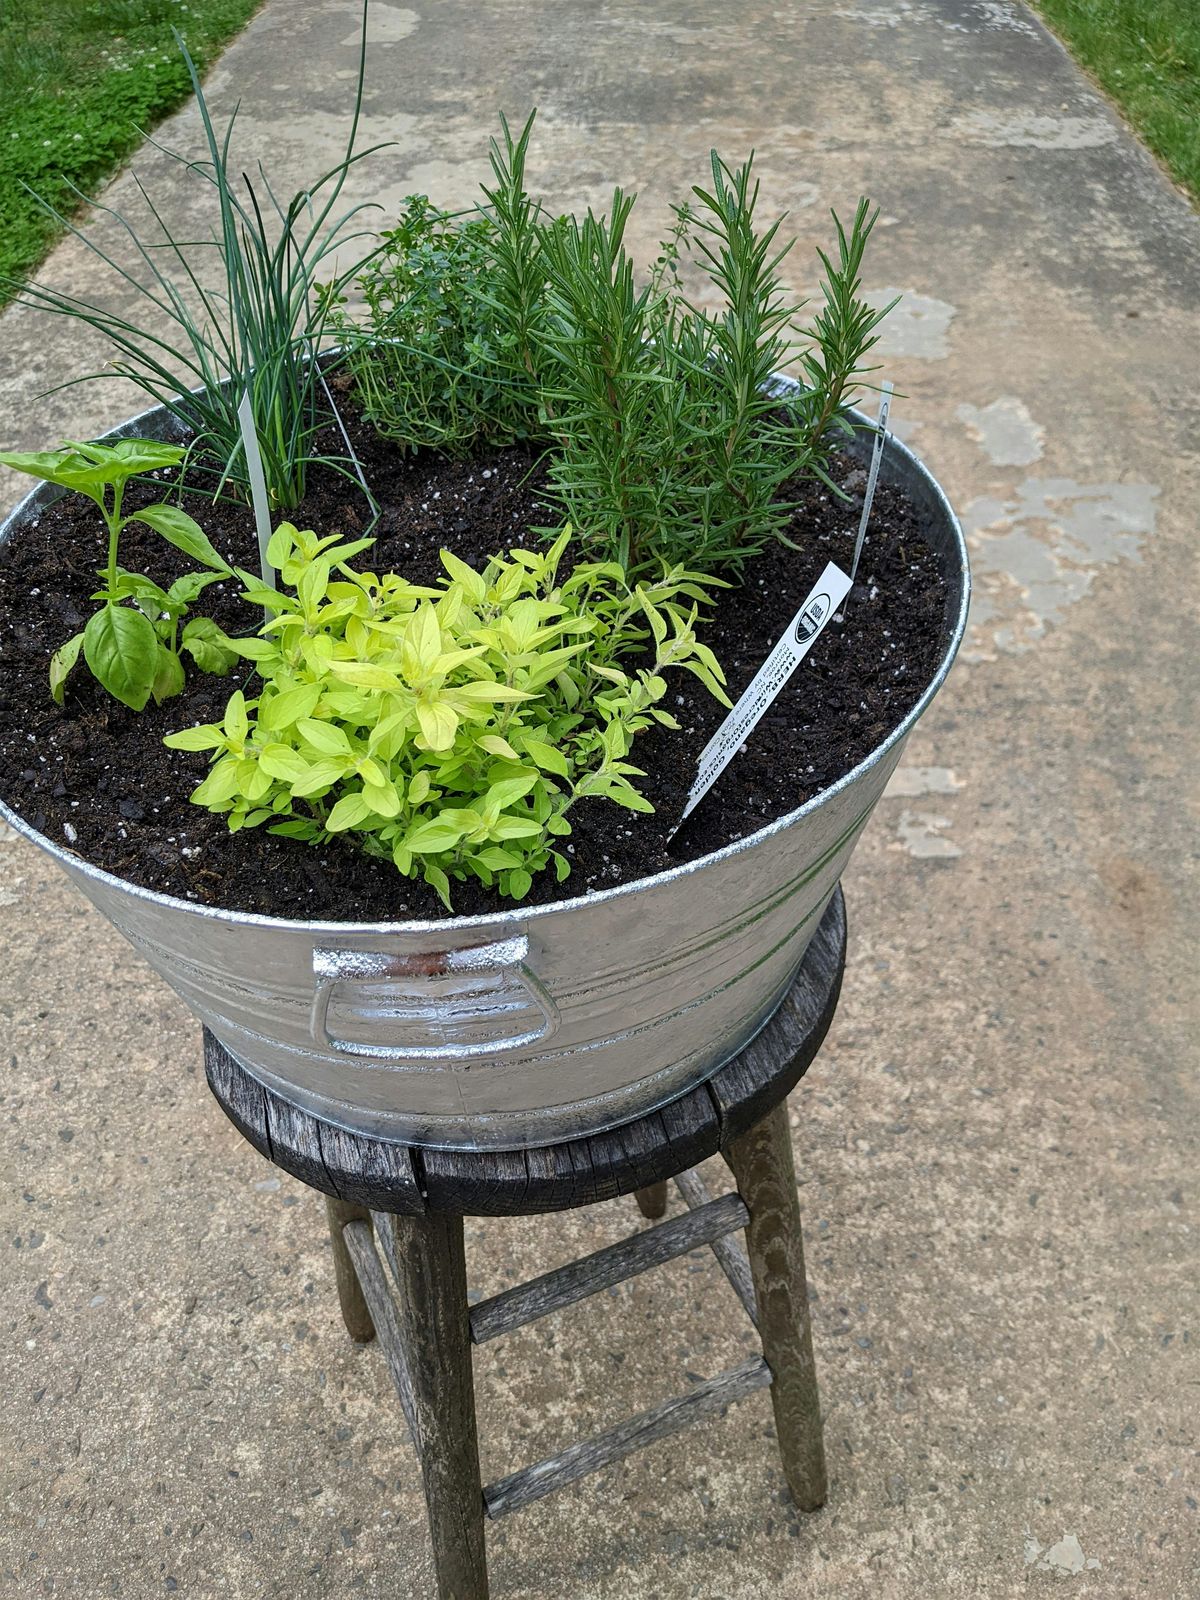 BYOP (Bring Your Own Pot) - Pizza Herbs with The Patio Farmer